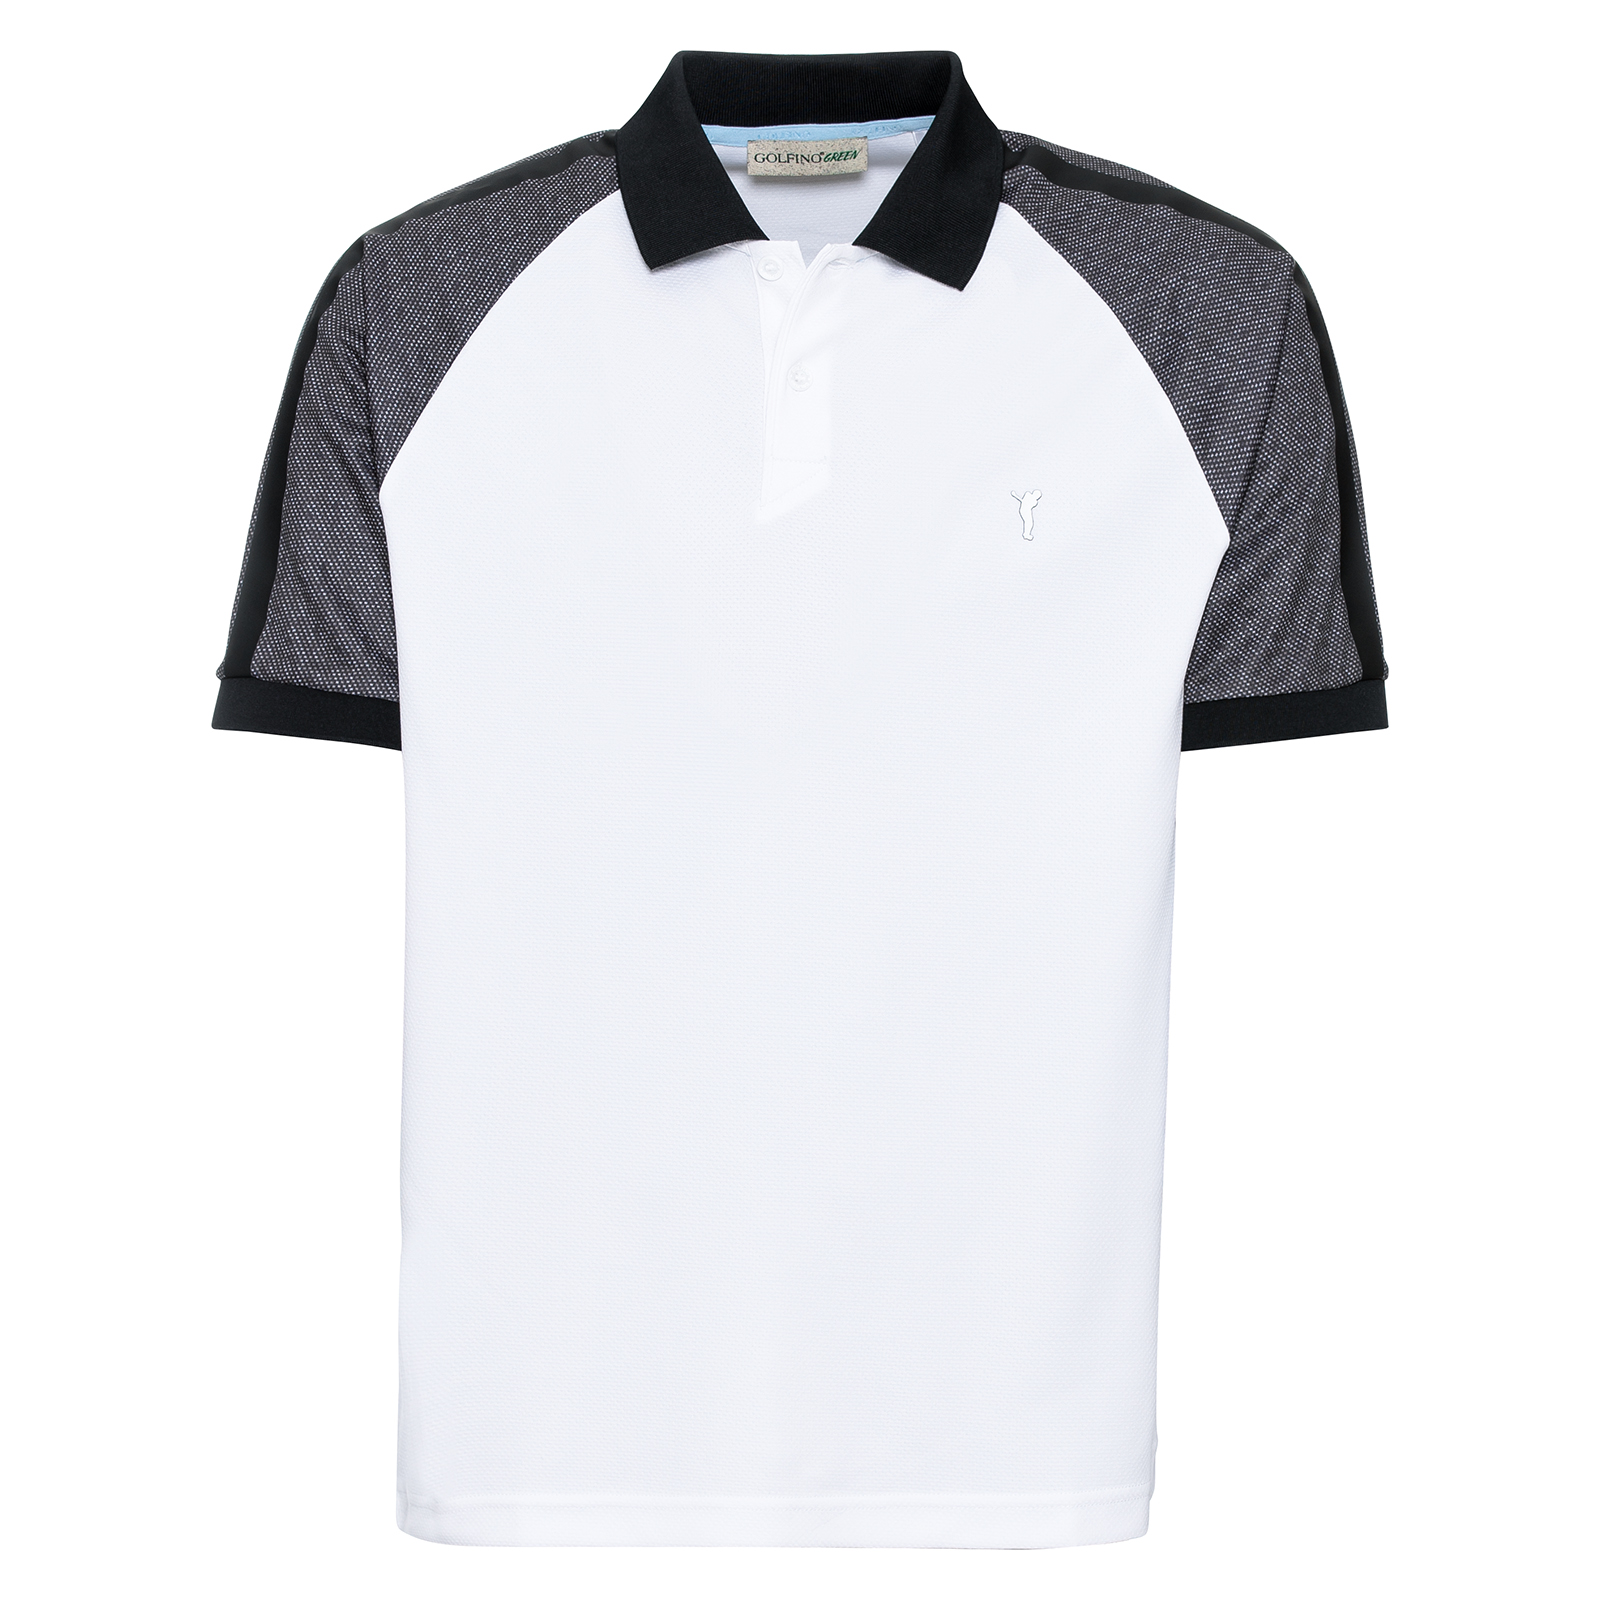 Men's eco-friendly golf polo shirt with moisture management function 